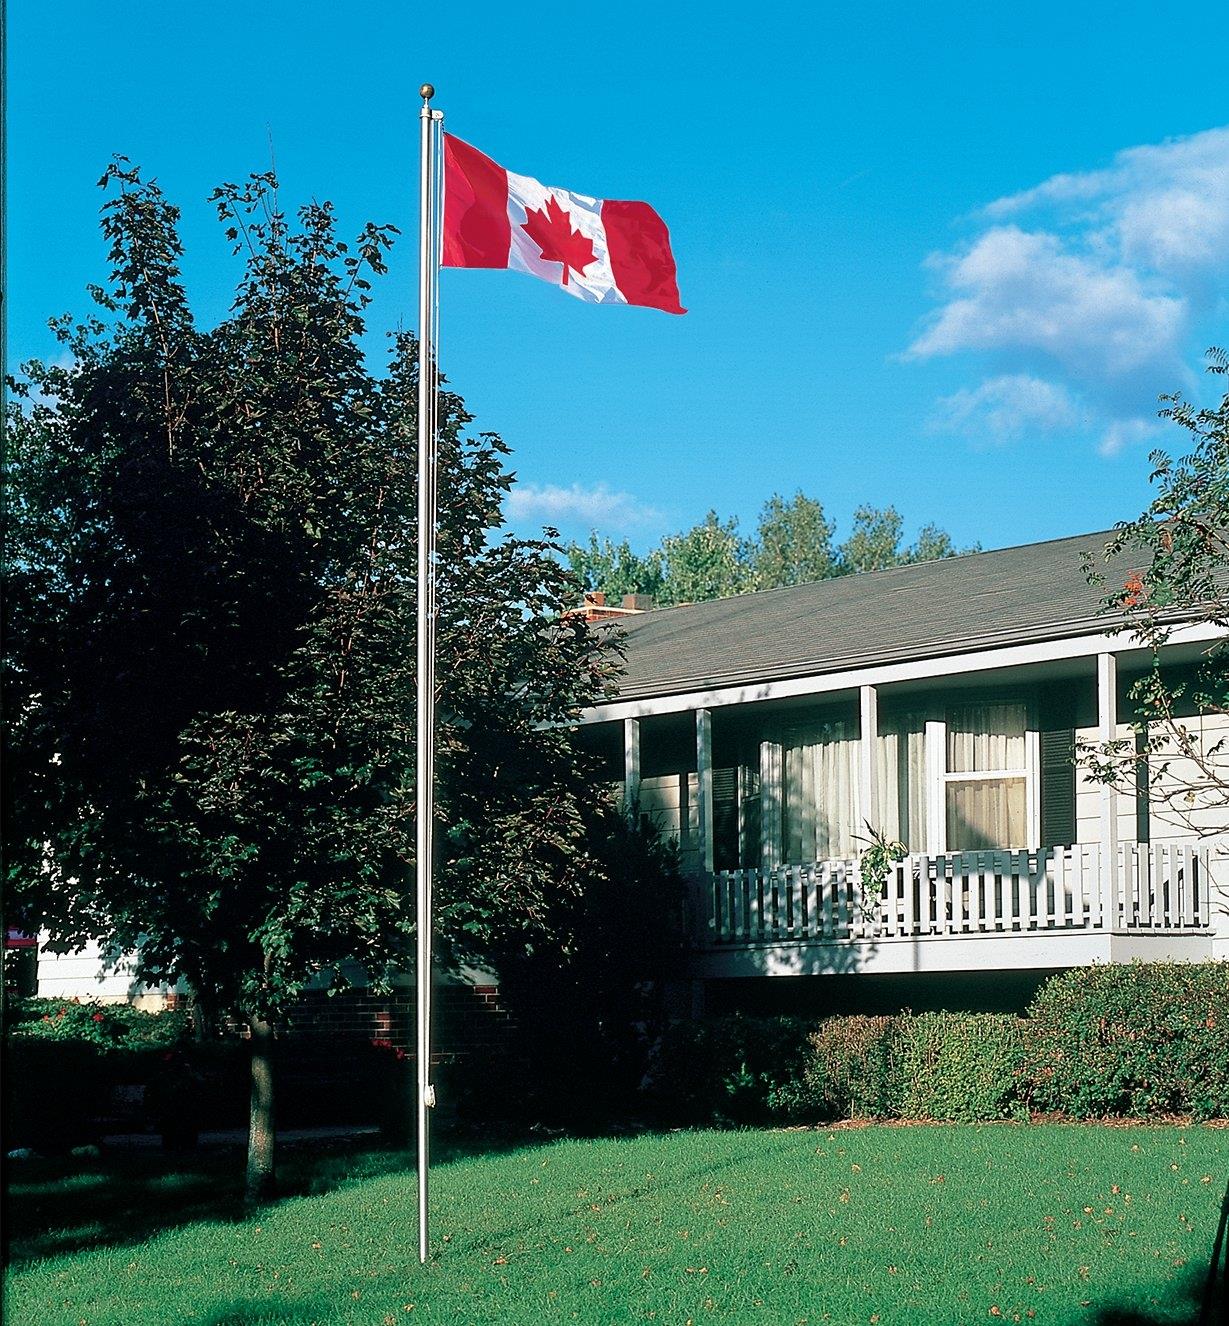 Deluxe Canadian Flag raised on a flagpole in front of a house